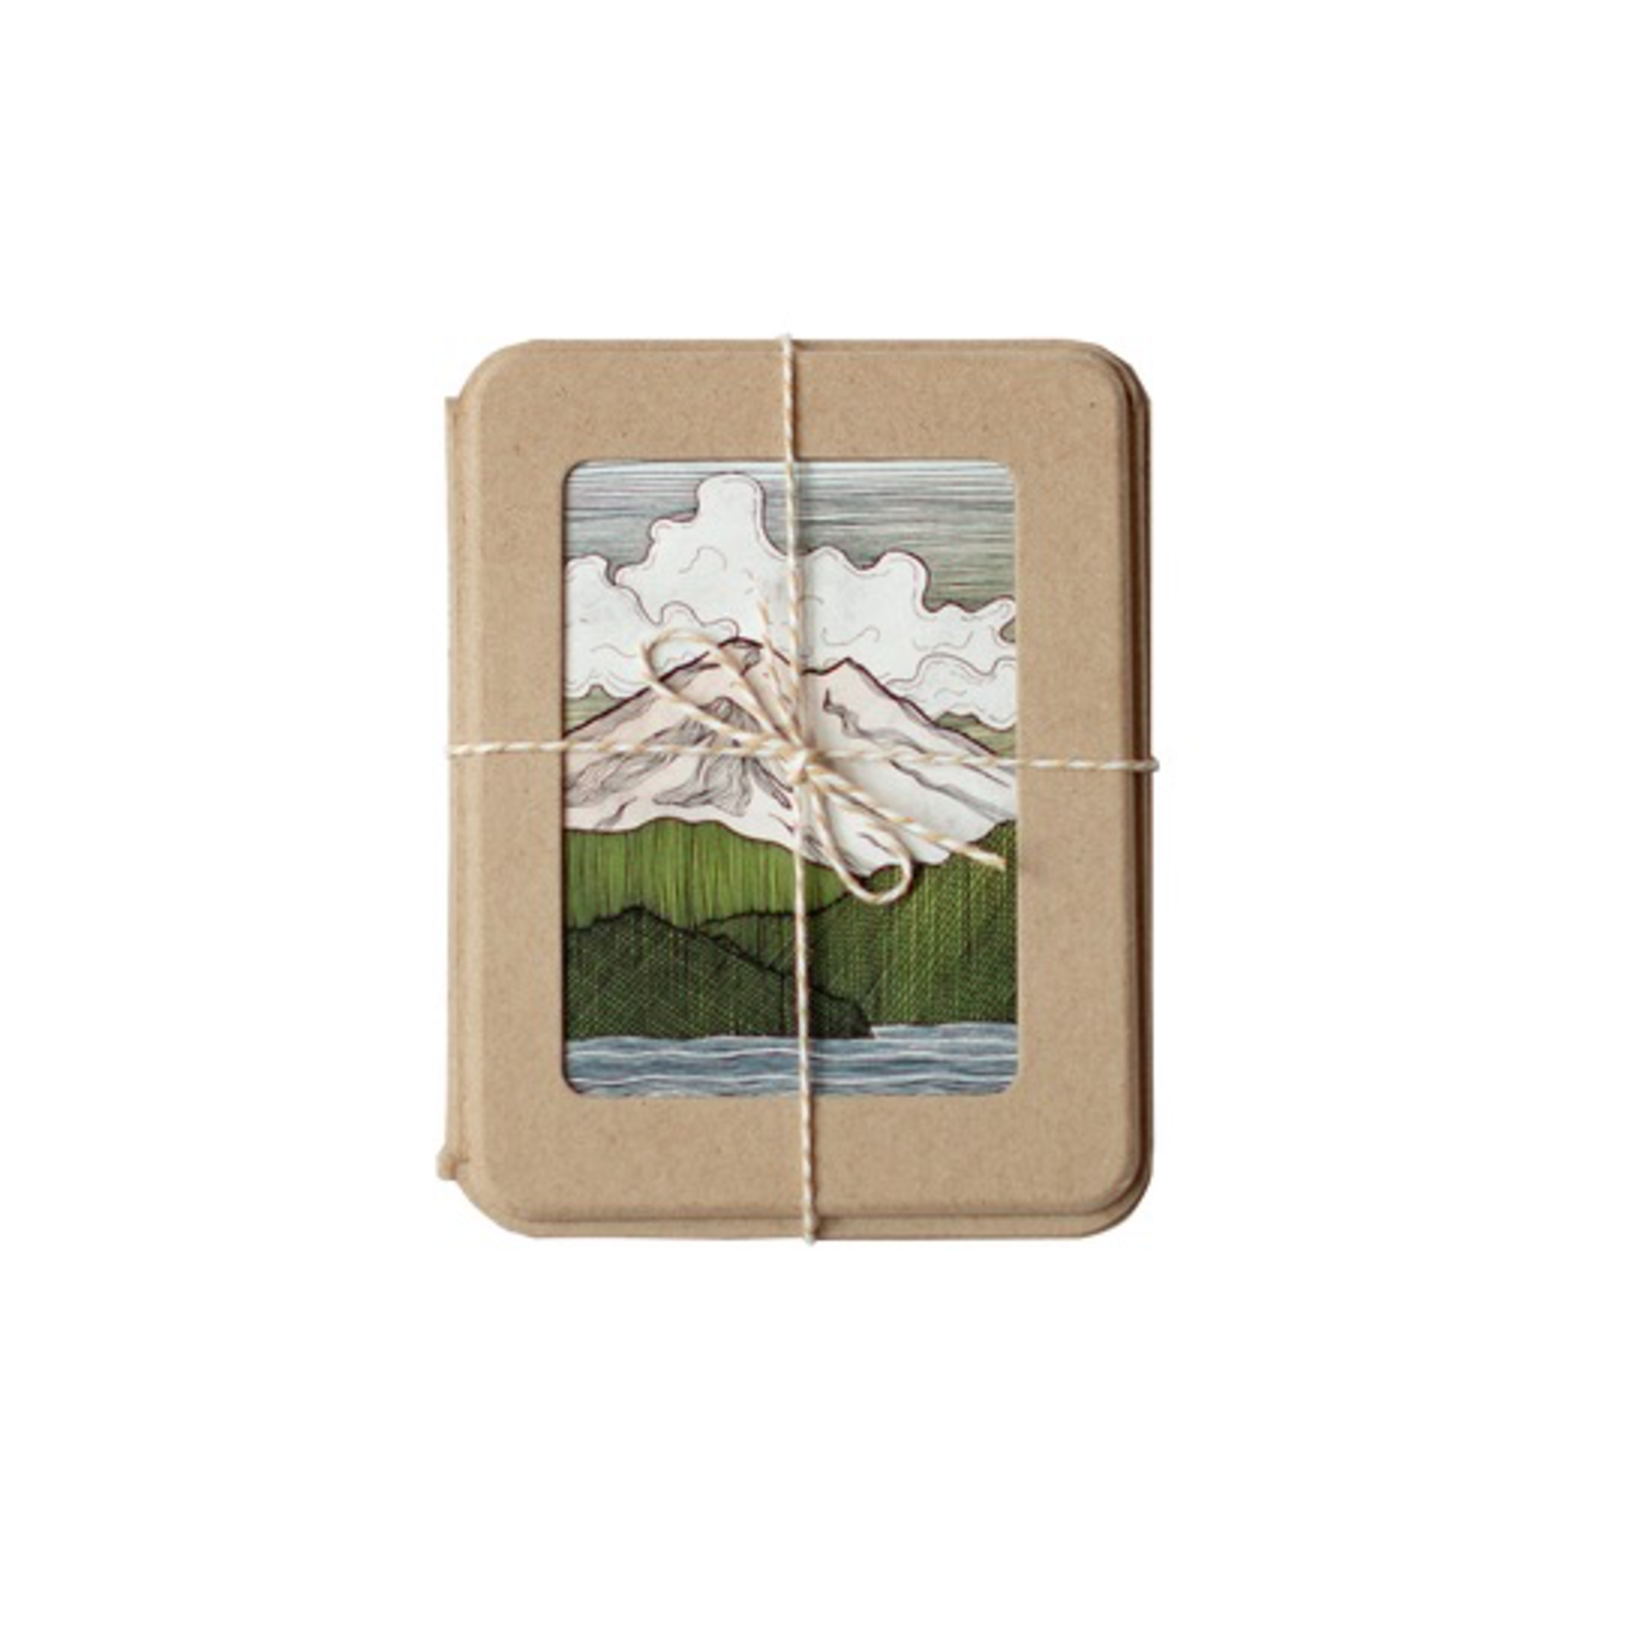 Notecards Boxed PNW Outdoor Cards S/12